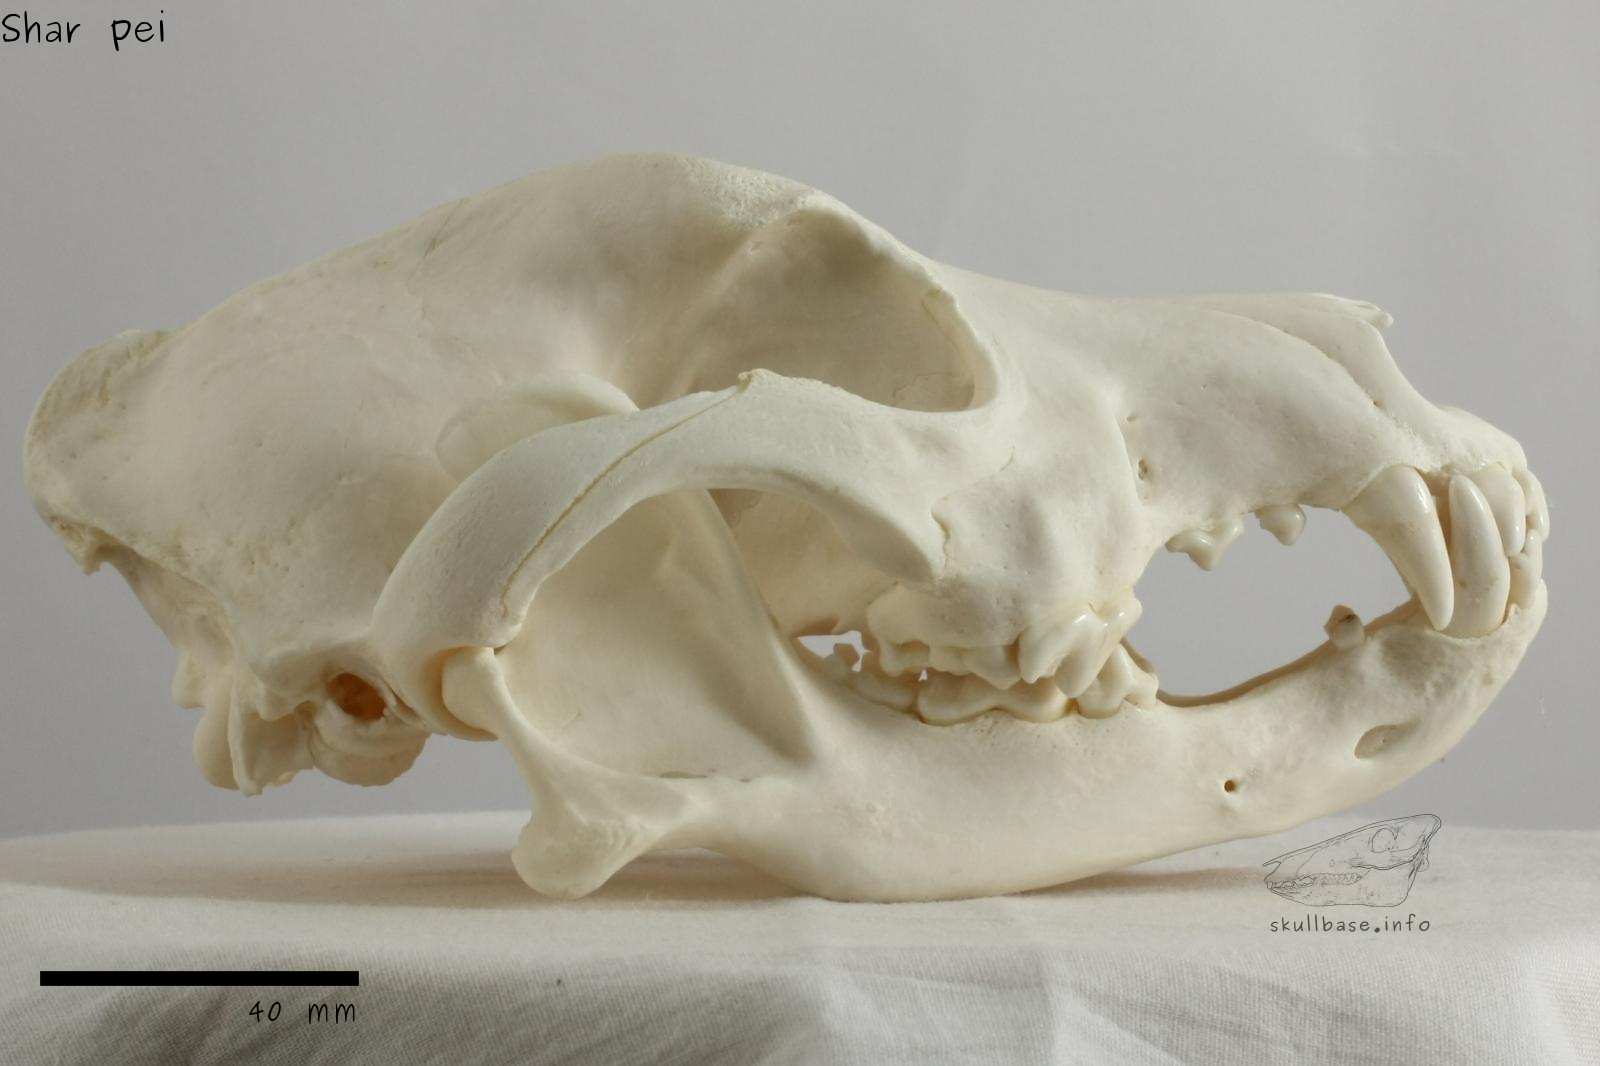 Shar pei (Canis lupus familiaris) skull lateral view